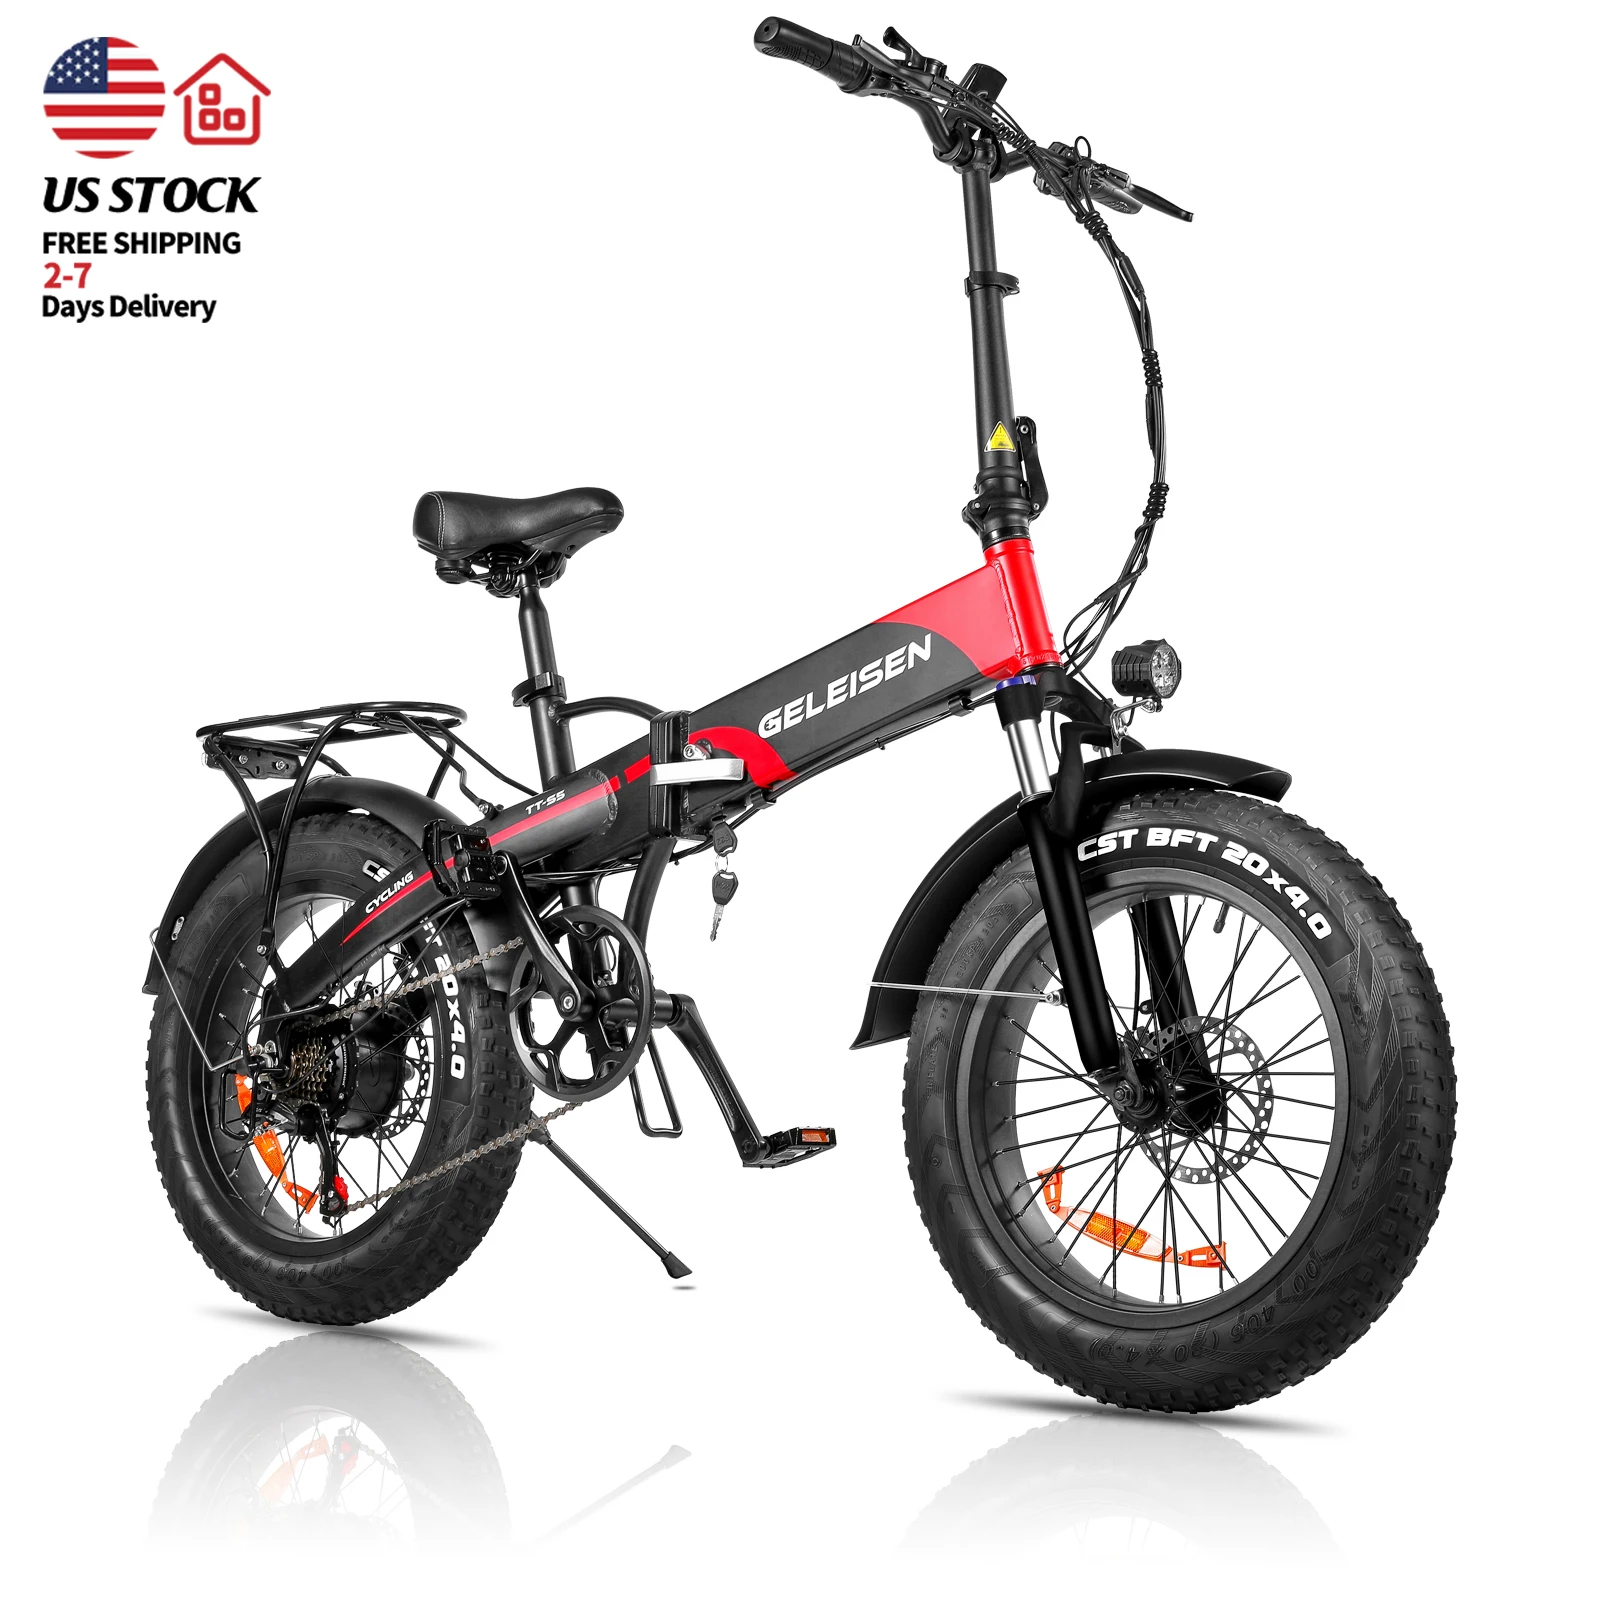 

GELEISEN Free Shipping US Warehouse 48V 500W Ebike 20 Inch Folding Bike Electric Fat Tire Bicycle for Adults, Black